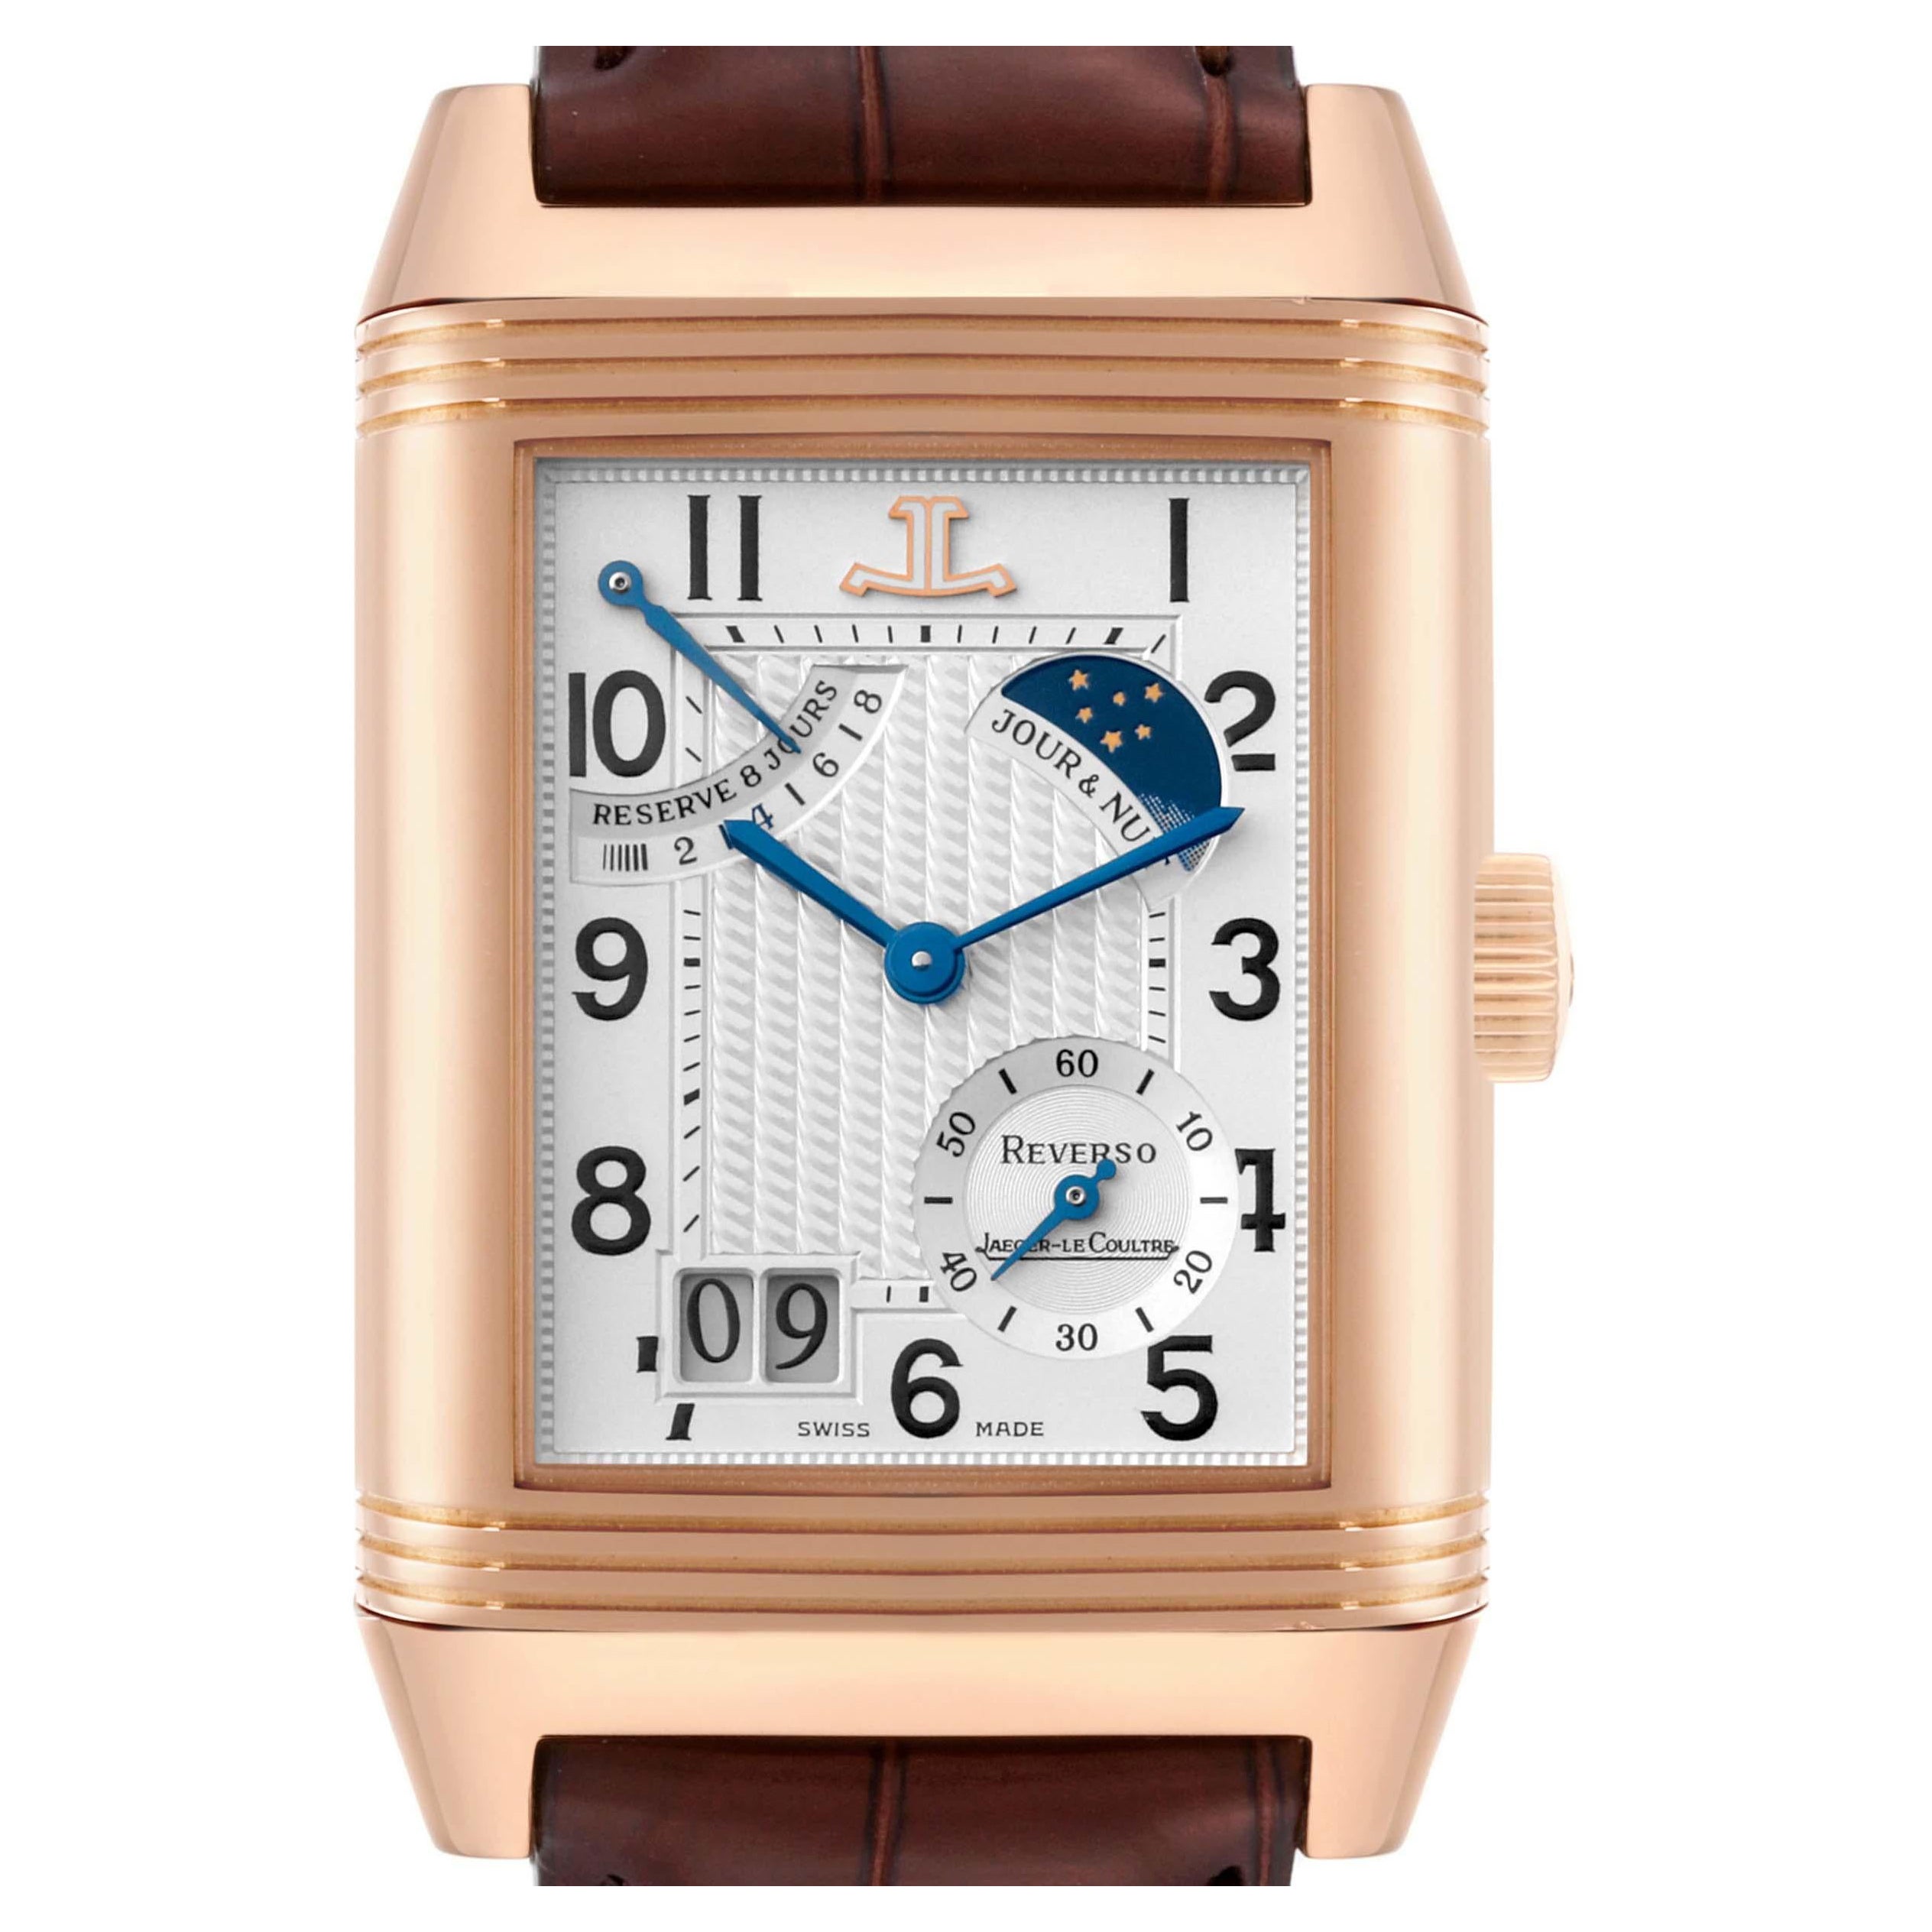 Jaeger LeCoultre Reverso Septantie Limited Edition Rose Gold Mens Watch 